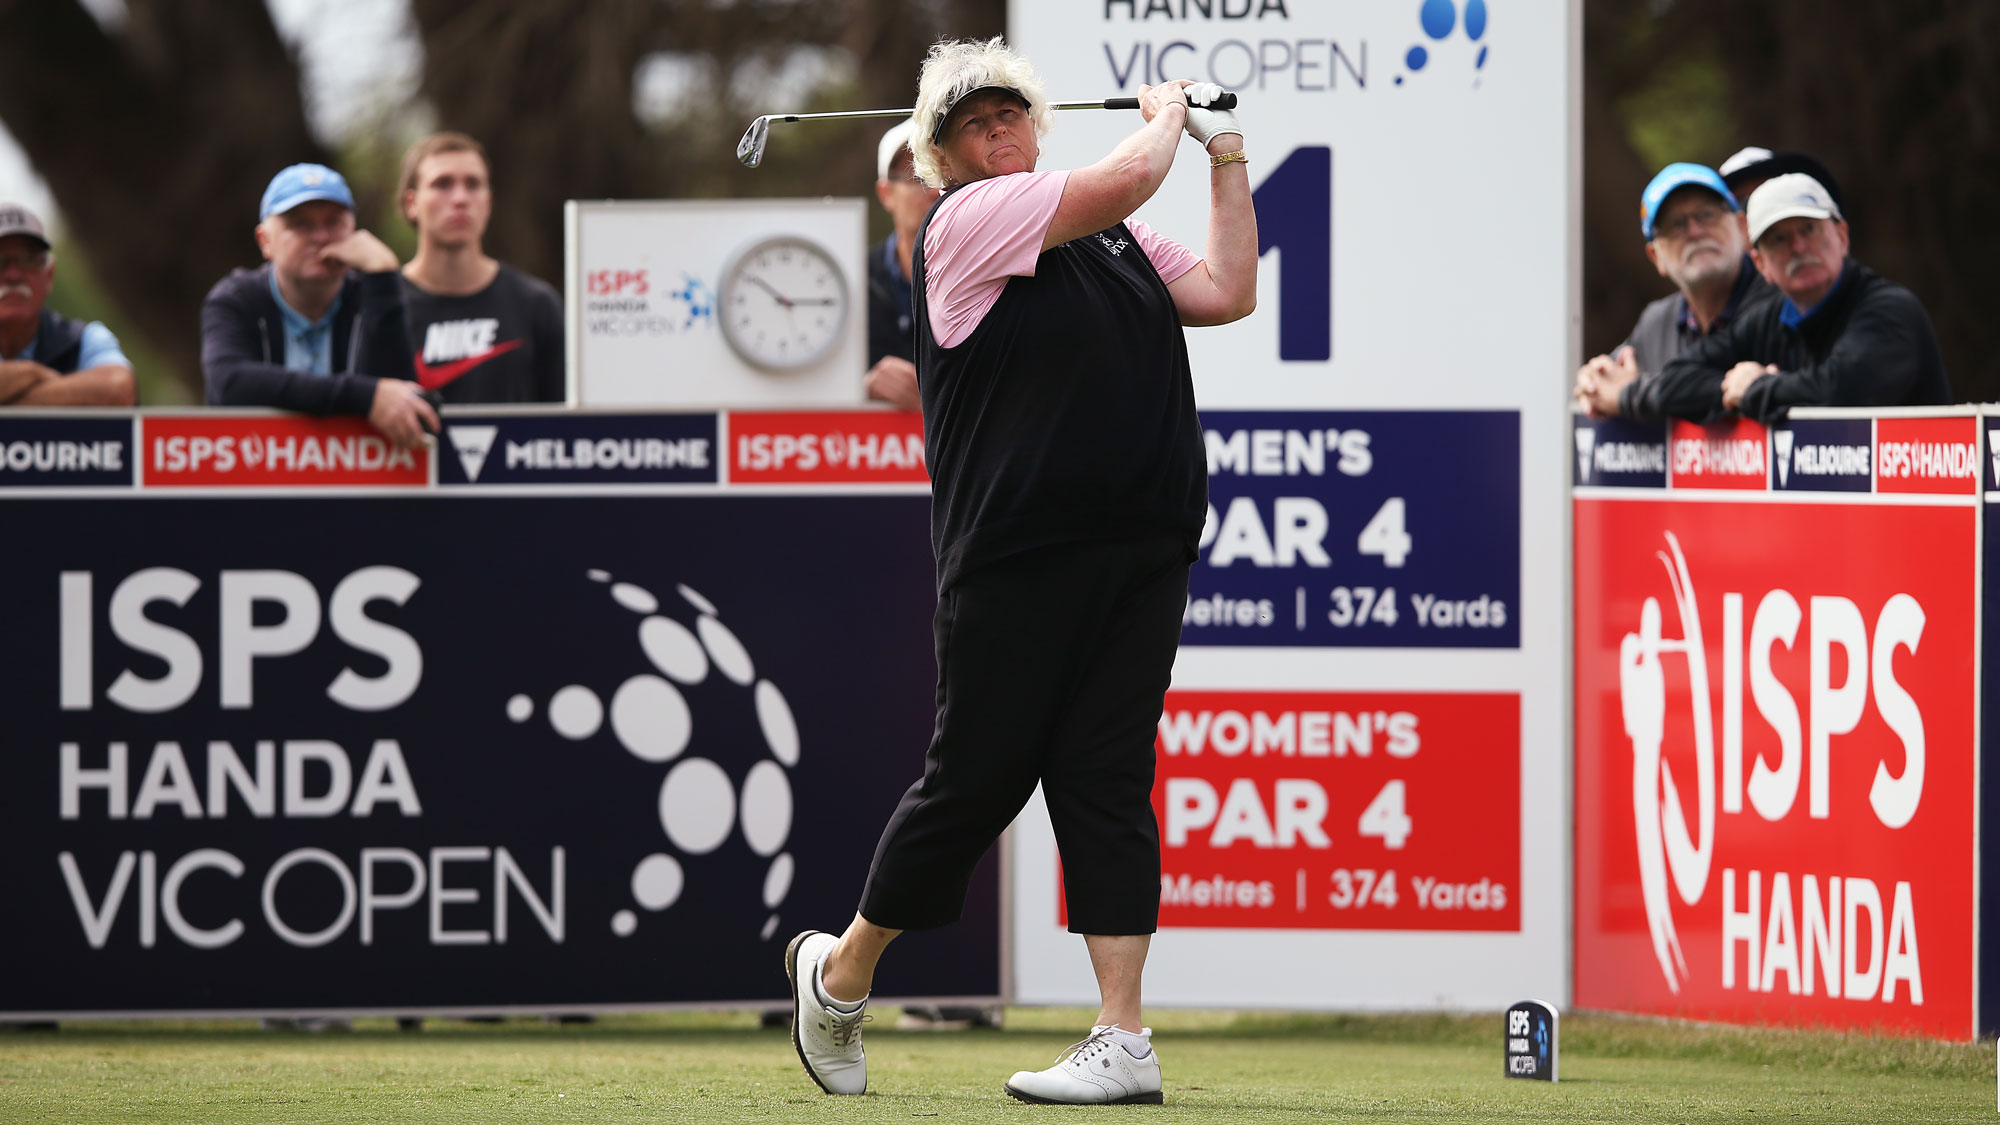 Laura Davies tees off during Round 1 of the ISPS Handa Vic Open